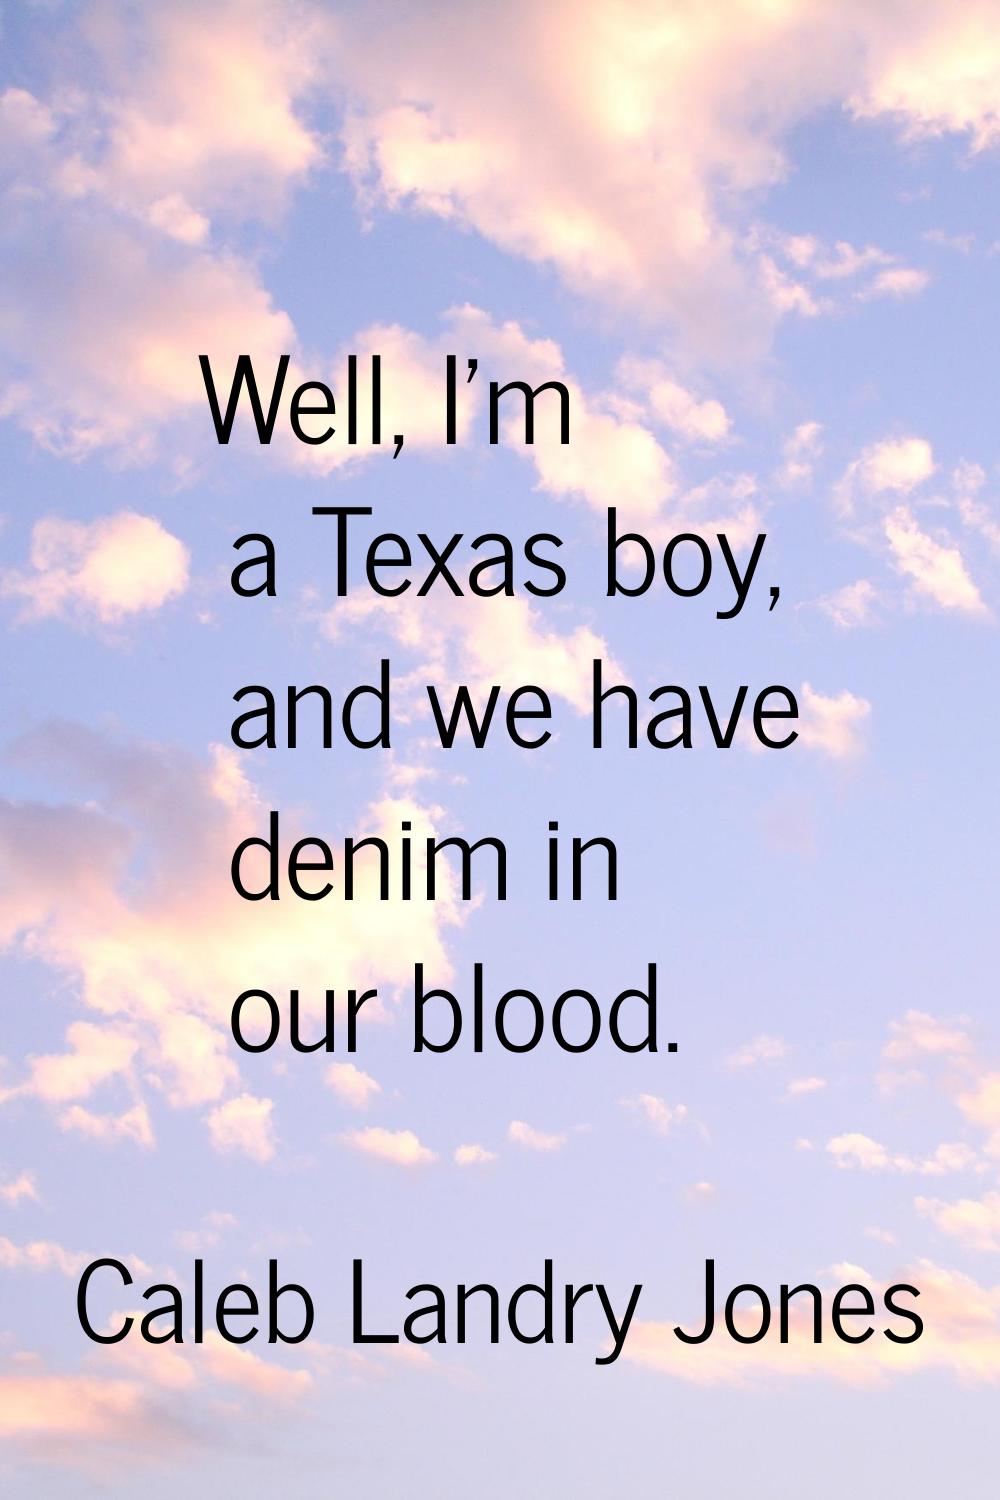 Well, I'm a Texas boy, and we have denim in our blood.